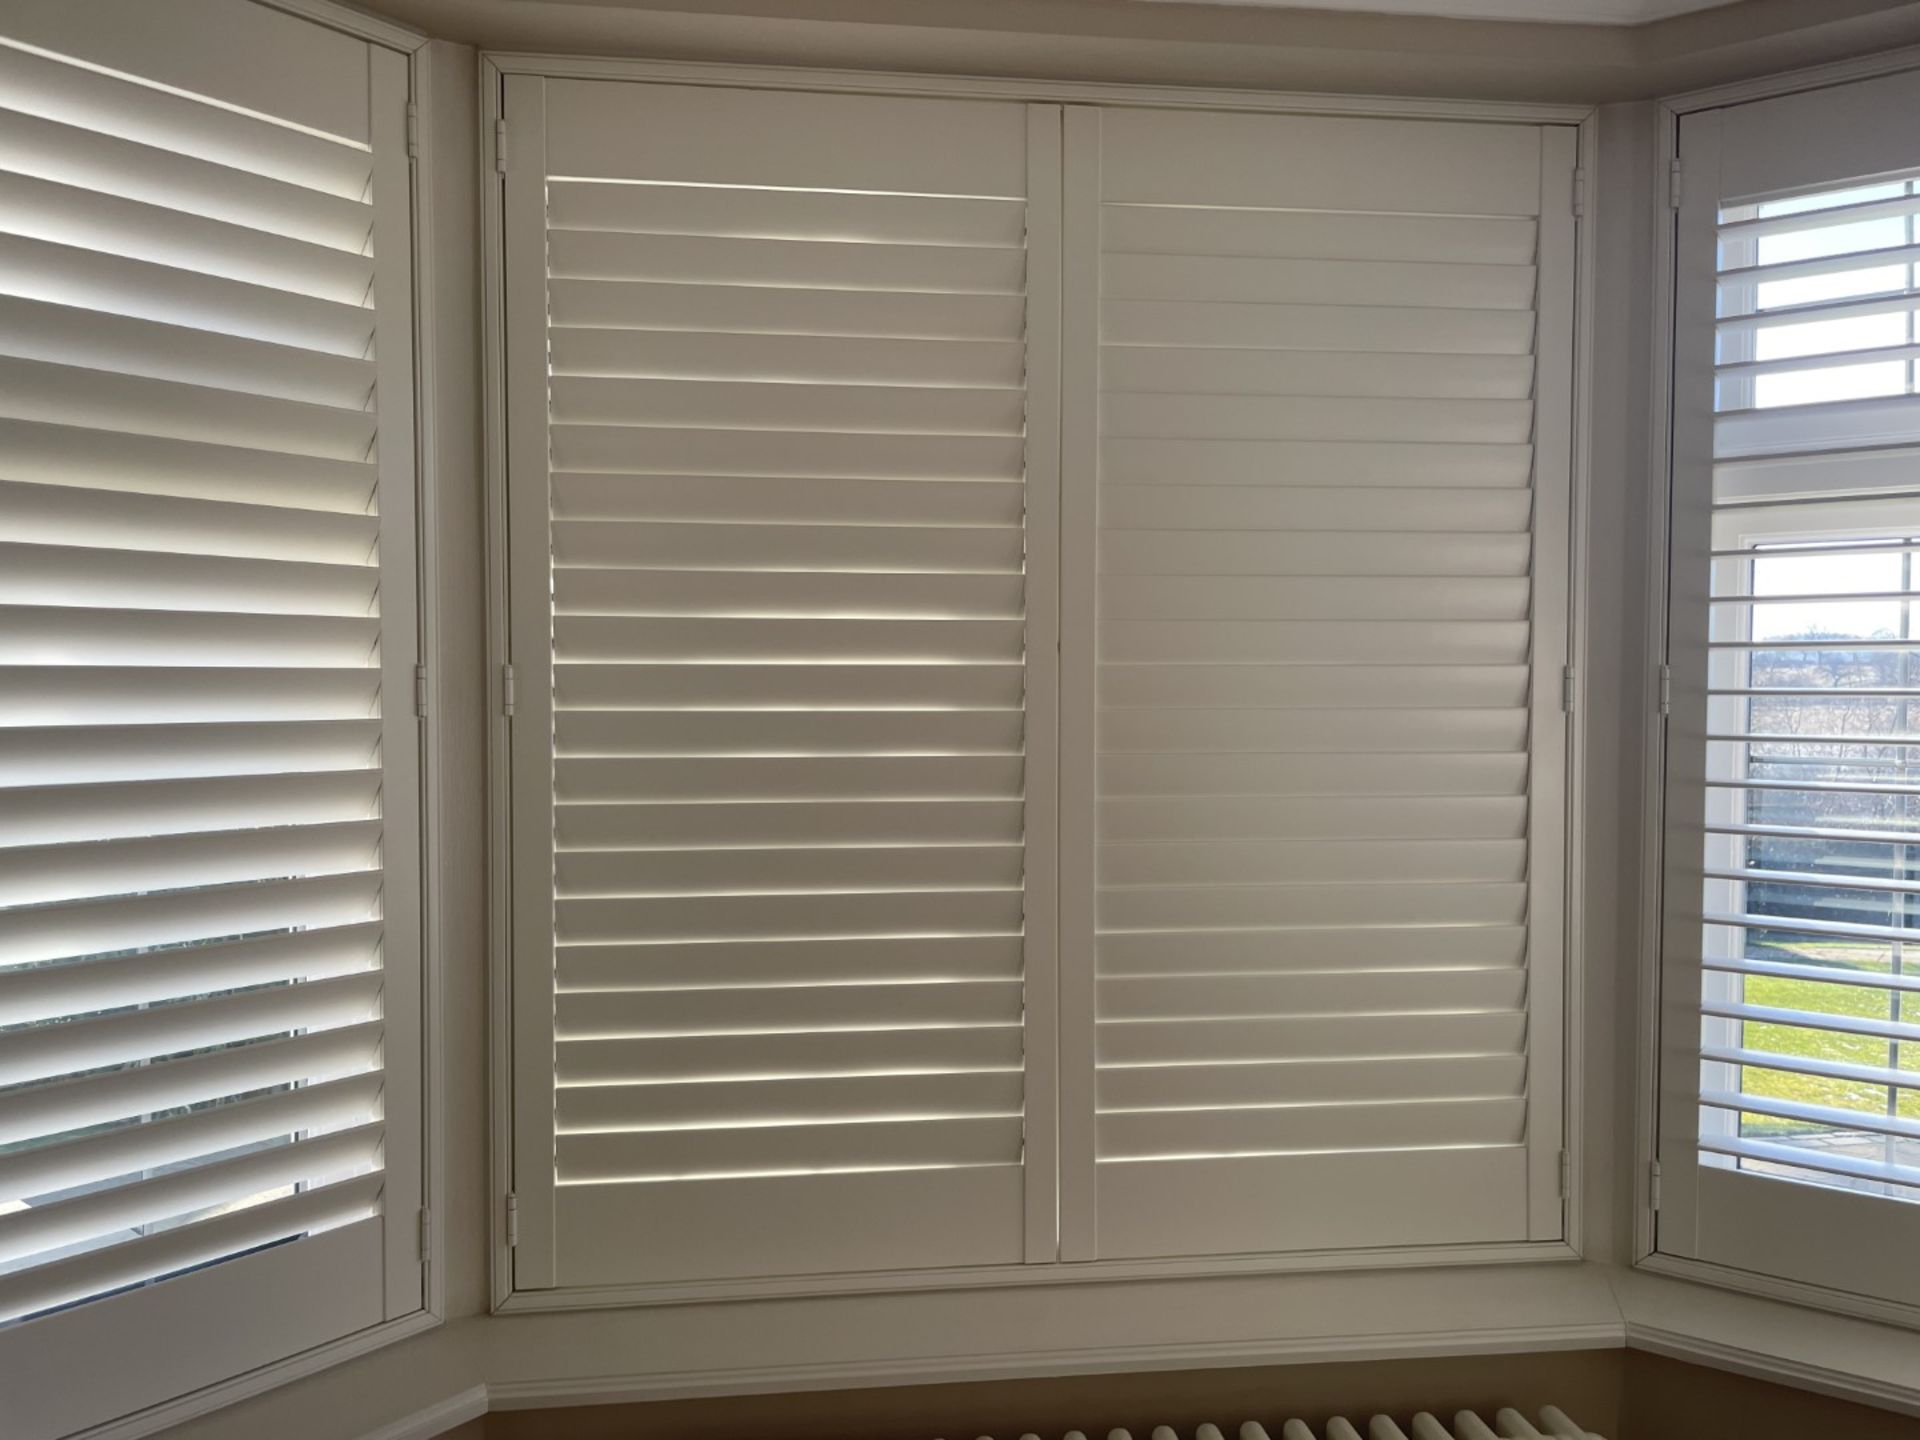 1 x Hardwood Timber Double Glazed Window Frames fitted with Shutter Blinds, In White - Ref: PAN102 - Image 9 of 13